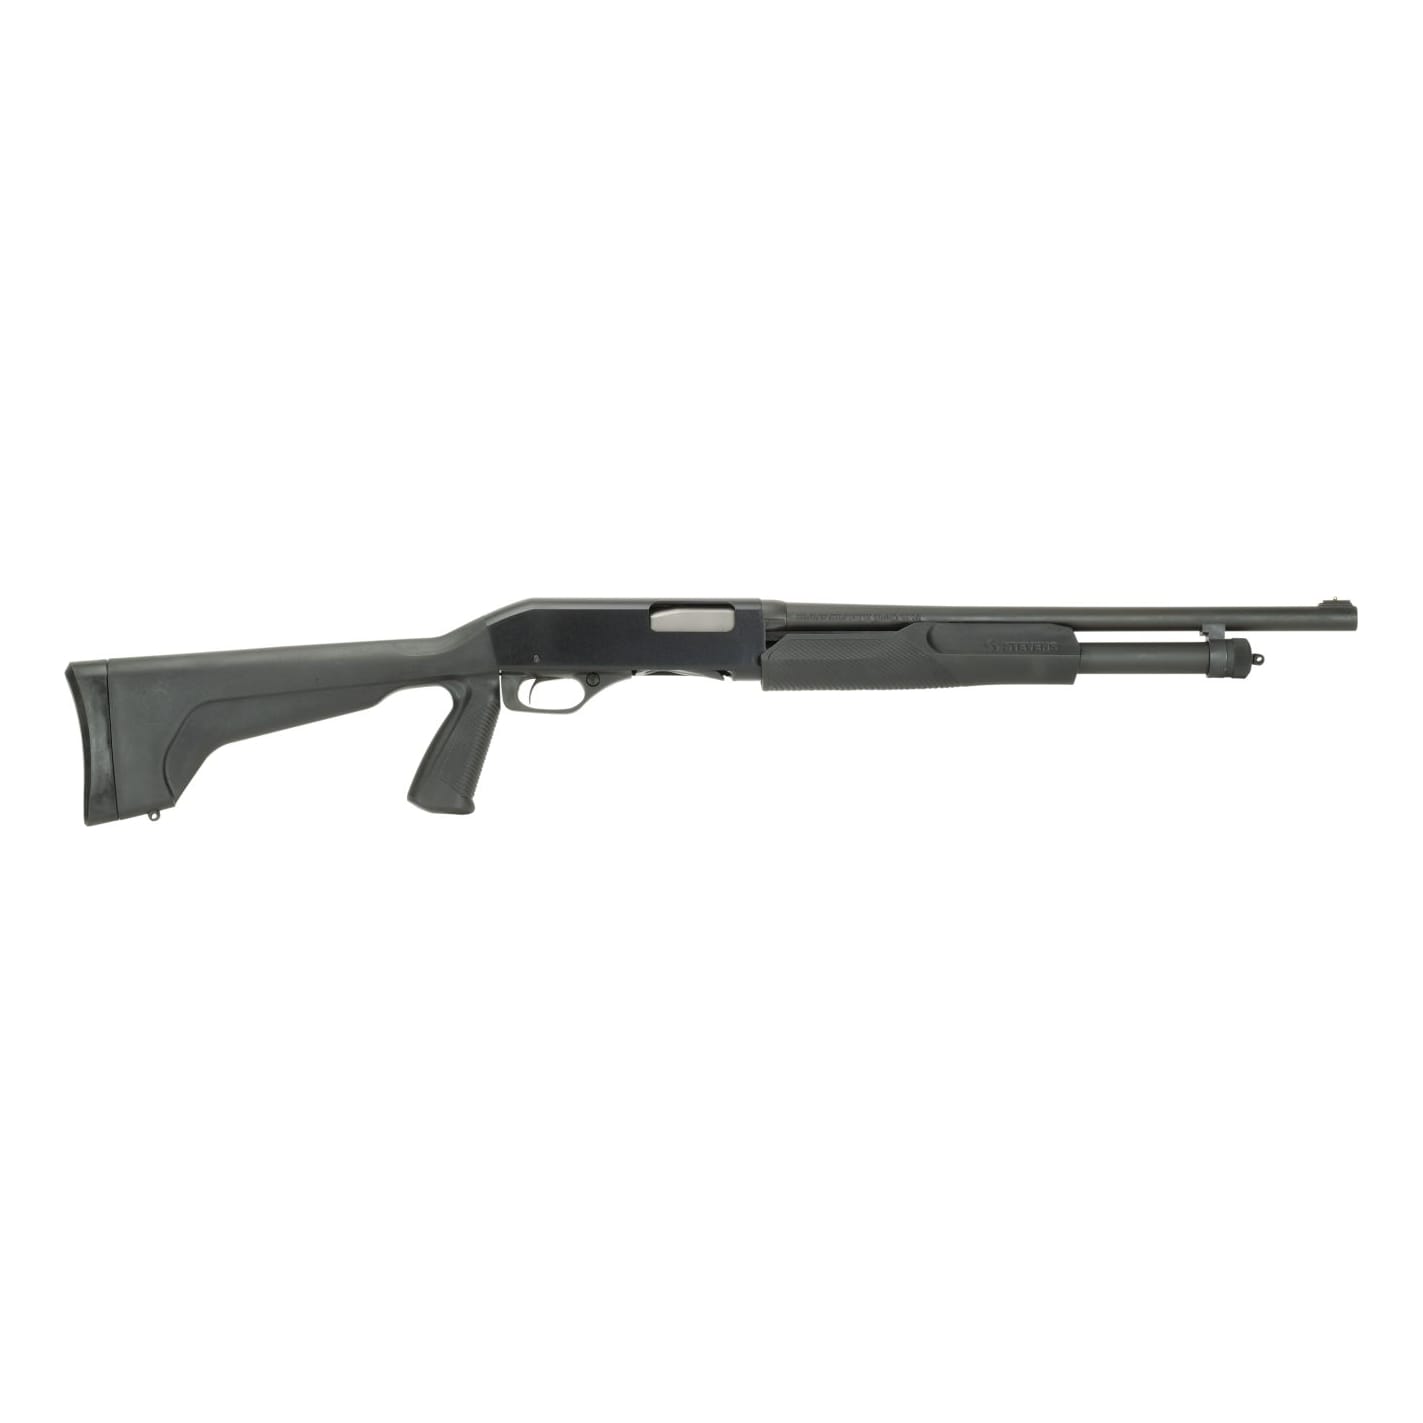 Question: Im looking to build a Slug thrower. 3 inch Winchester